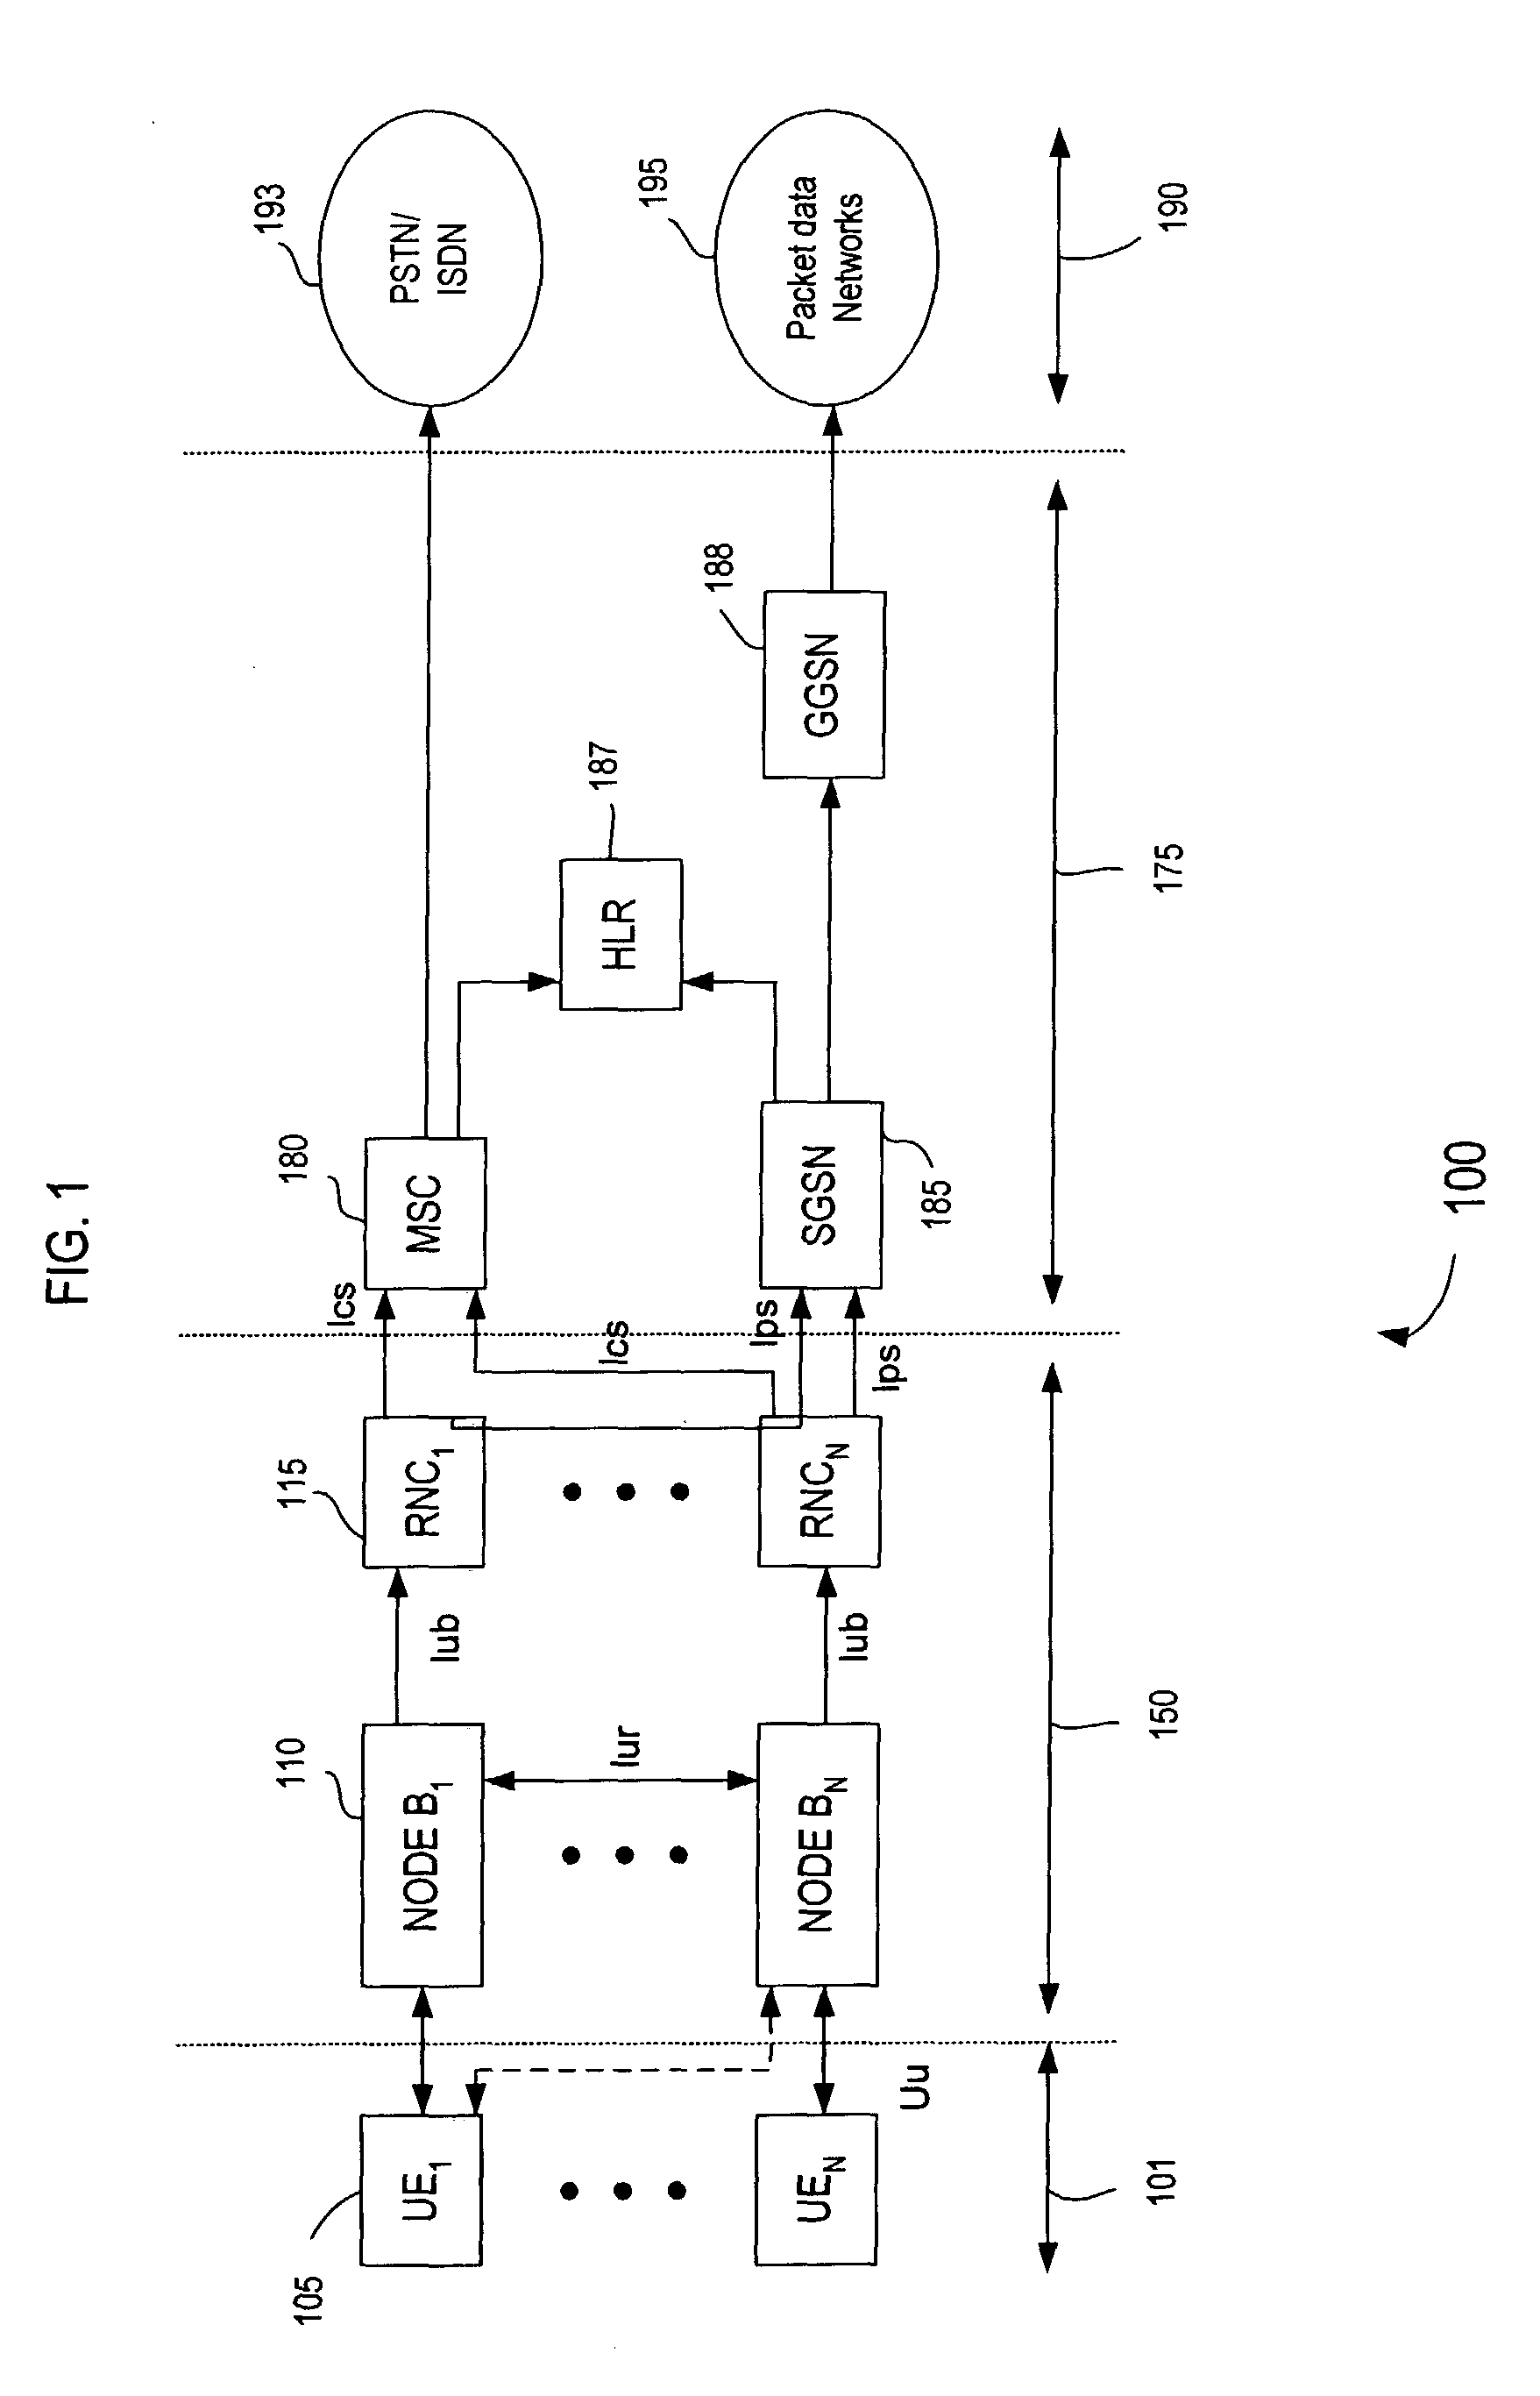 Method of mapping data for uplink transmission in communication systems